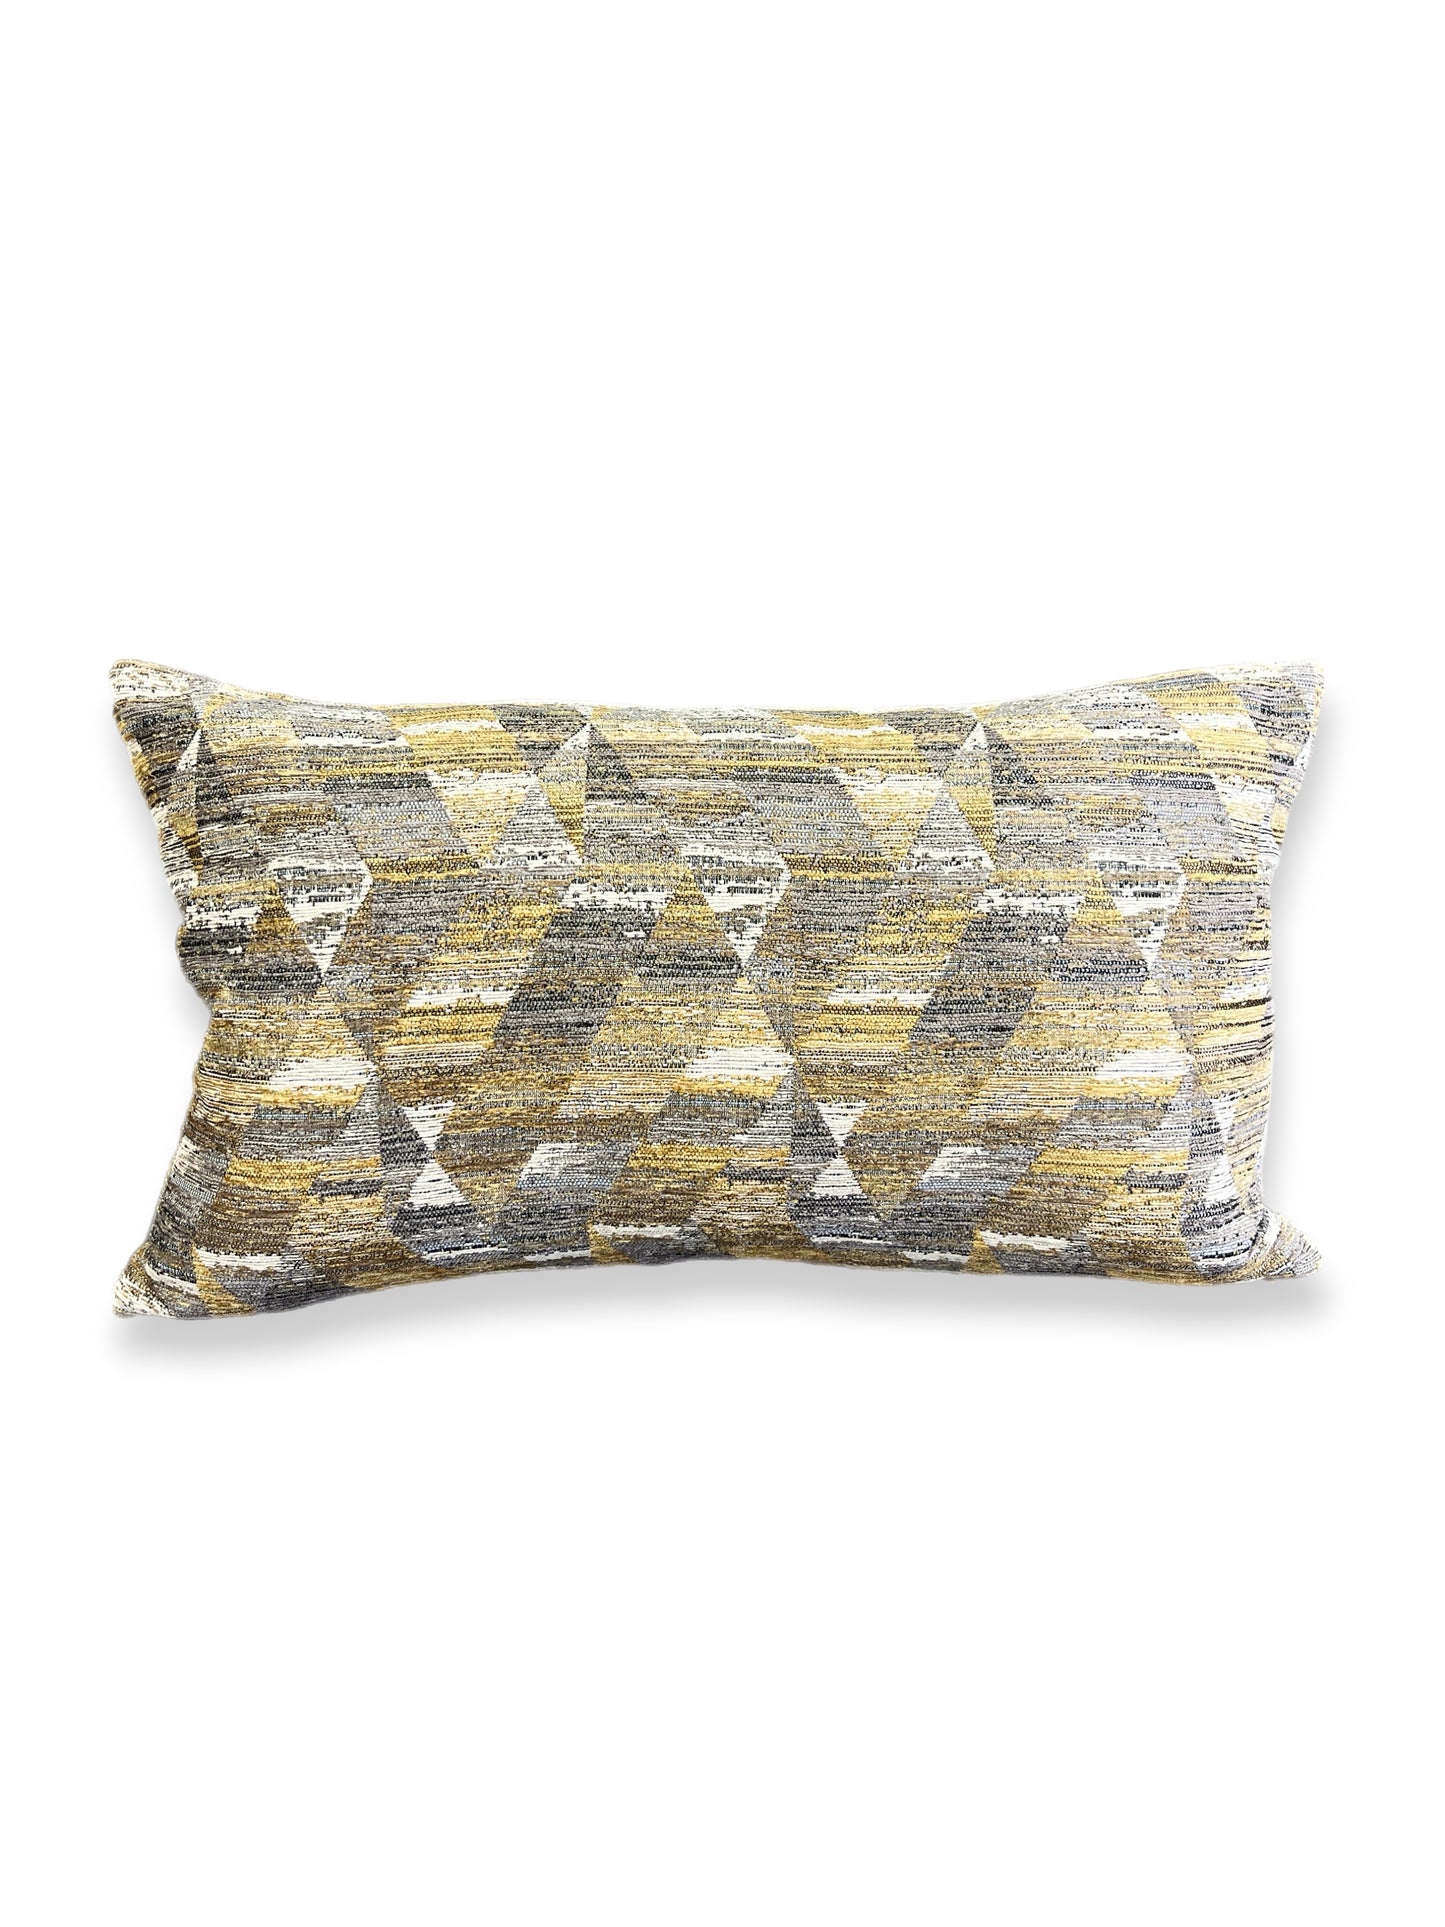 Luxury Lumbar Pillow - 24" x 14" -  Pyramid Jewel; Woven pyramids of black, gold, grey, and cream with hints of lustrous golden threads